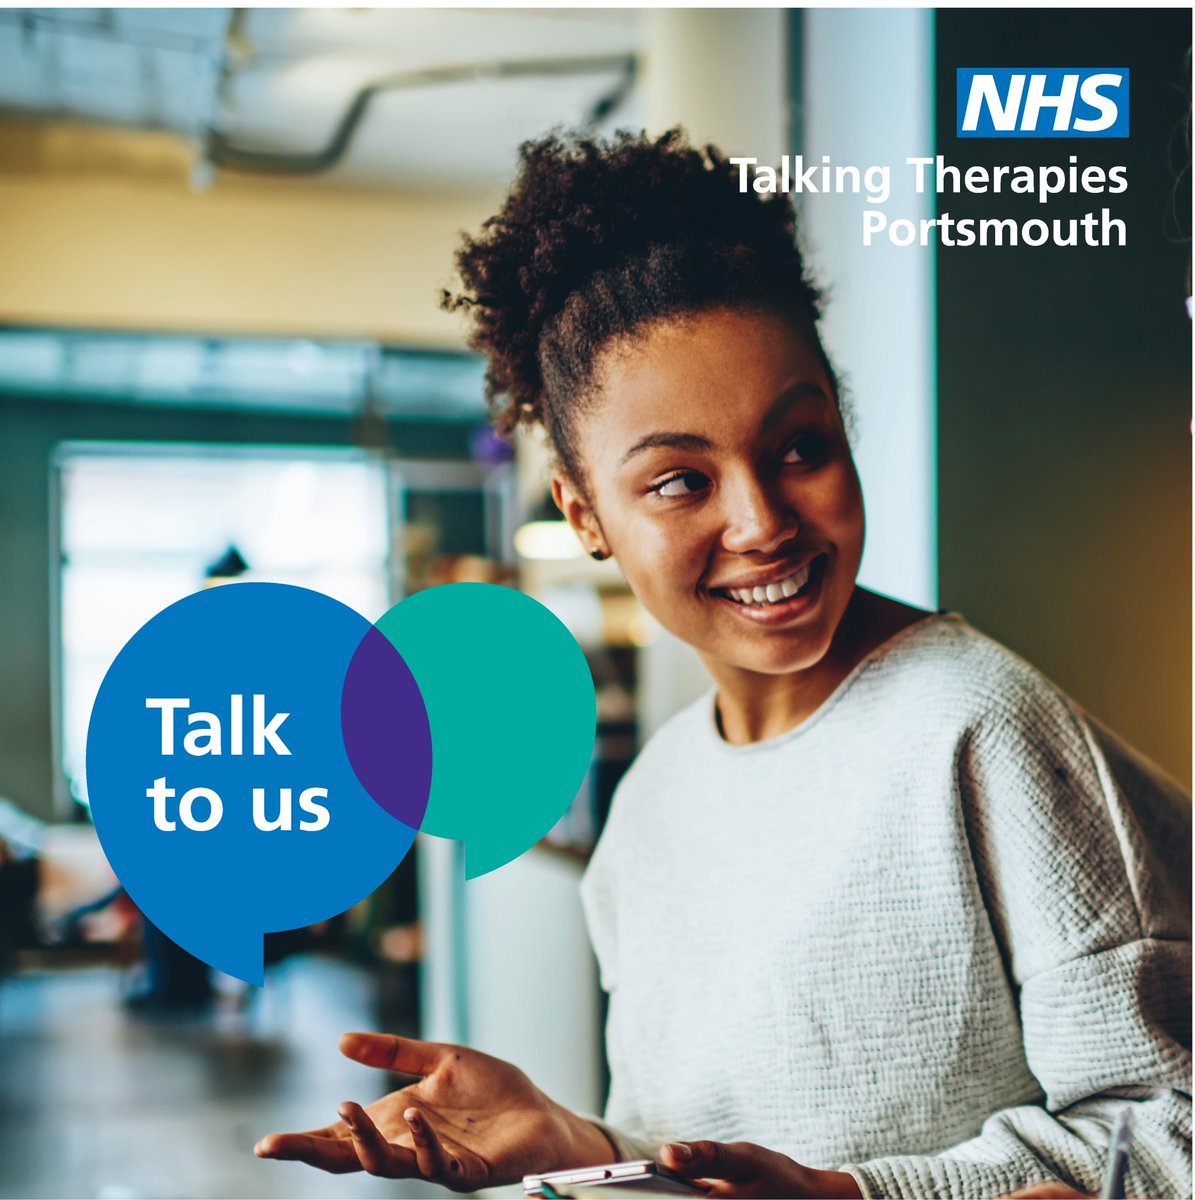 Did you know NHS Talking Therapies Portsmouth is a free and confidential service for anyone aged sixteen or over? If you are registered with a GP in the city, you can self-refer by calling 0300 123 3934 or find out more on our dedicated website talkingtherapiesportsmouth.nhs.uk